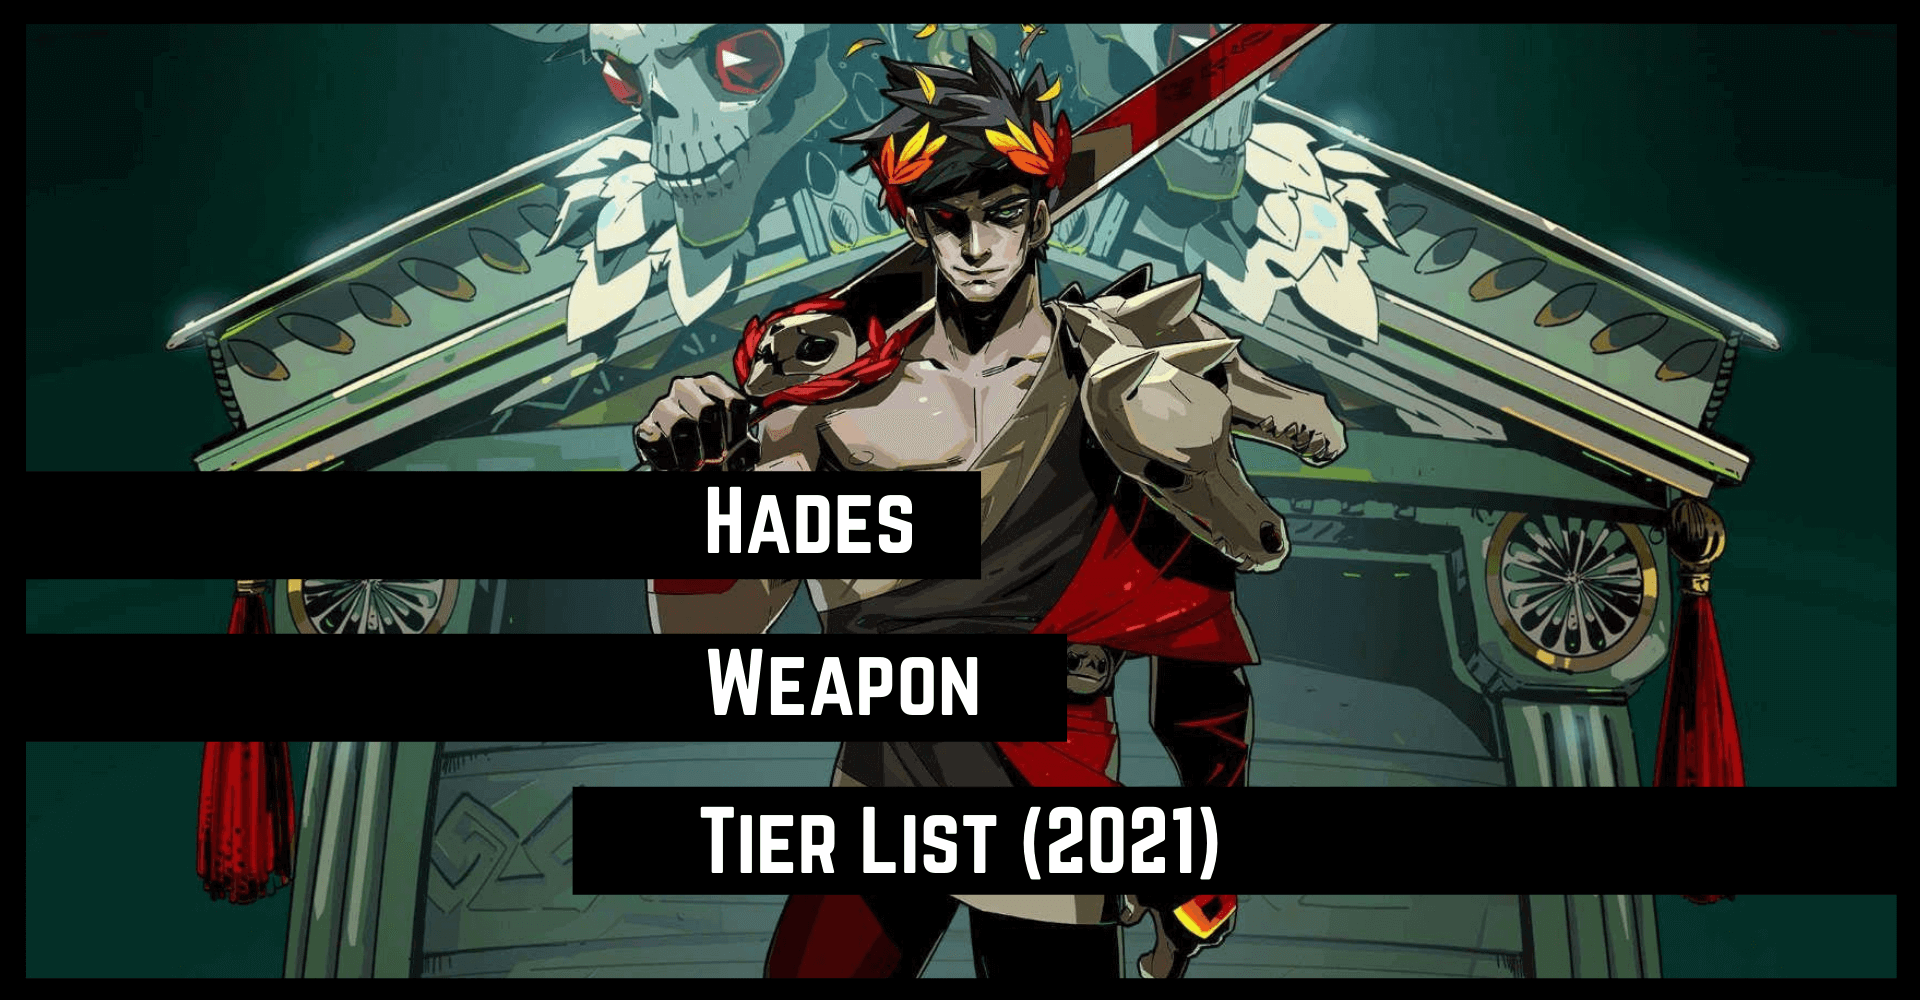 hades weapons and armor